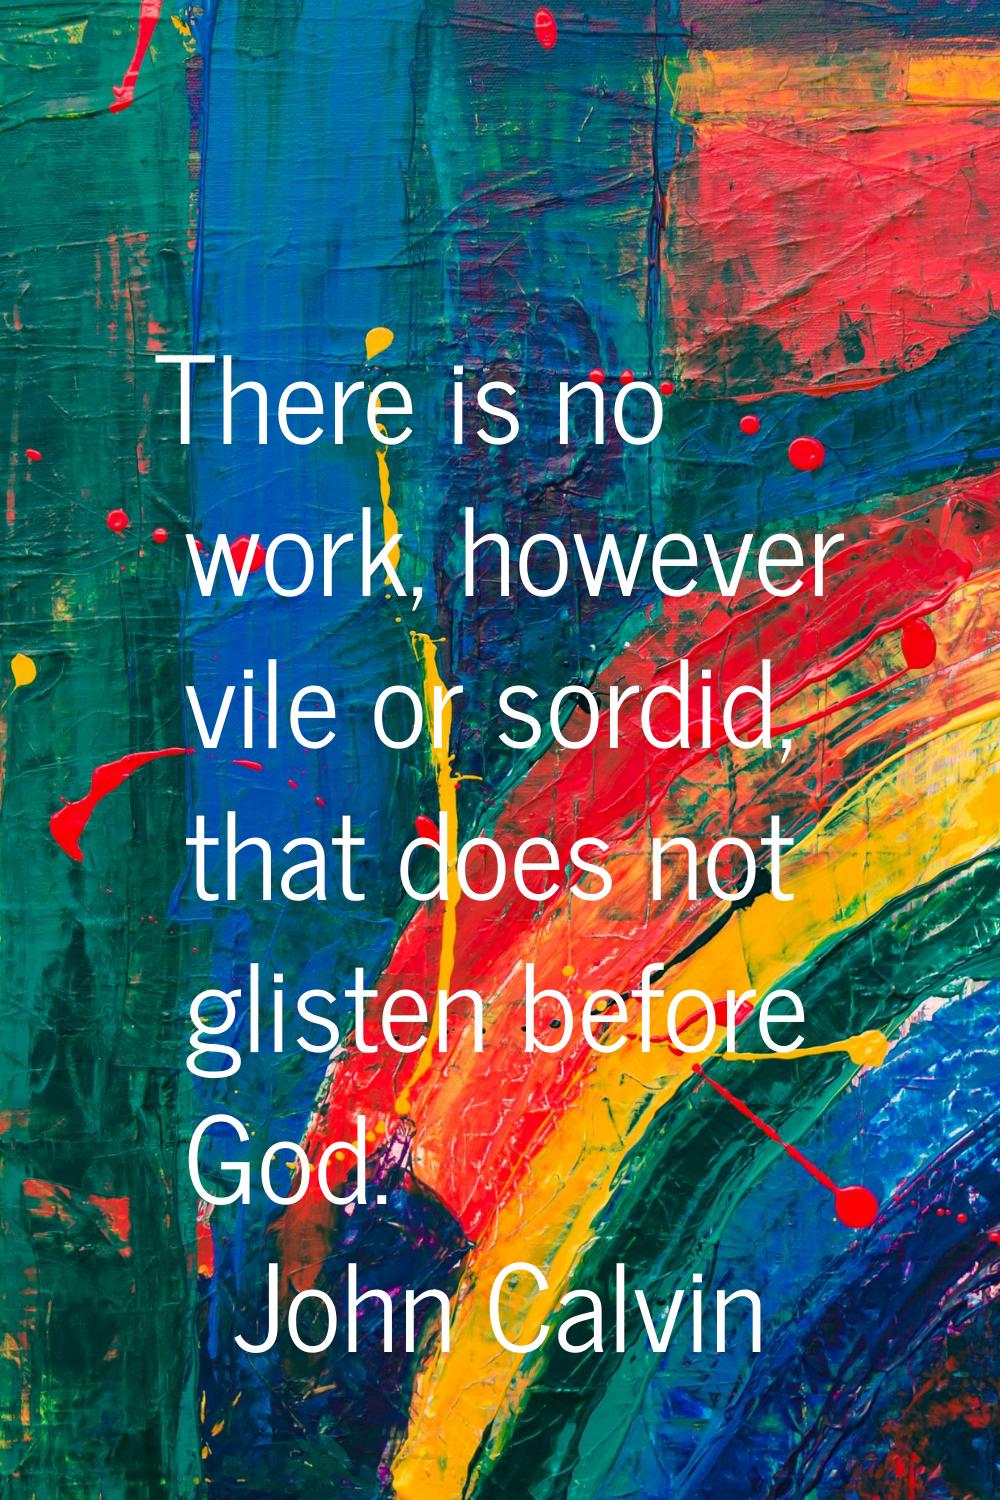 There is no work, however vile or sordid, that does not glisten before God.